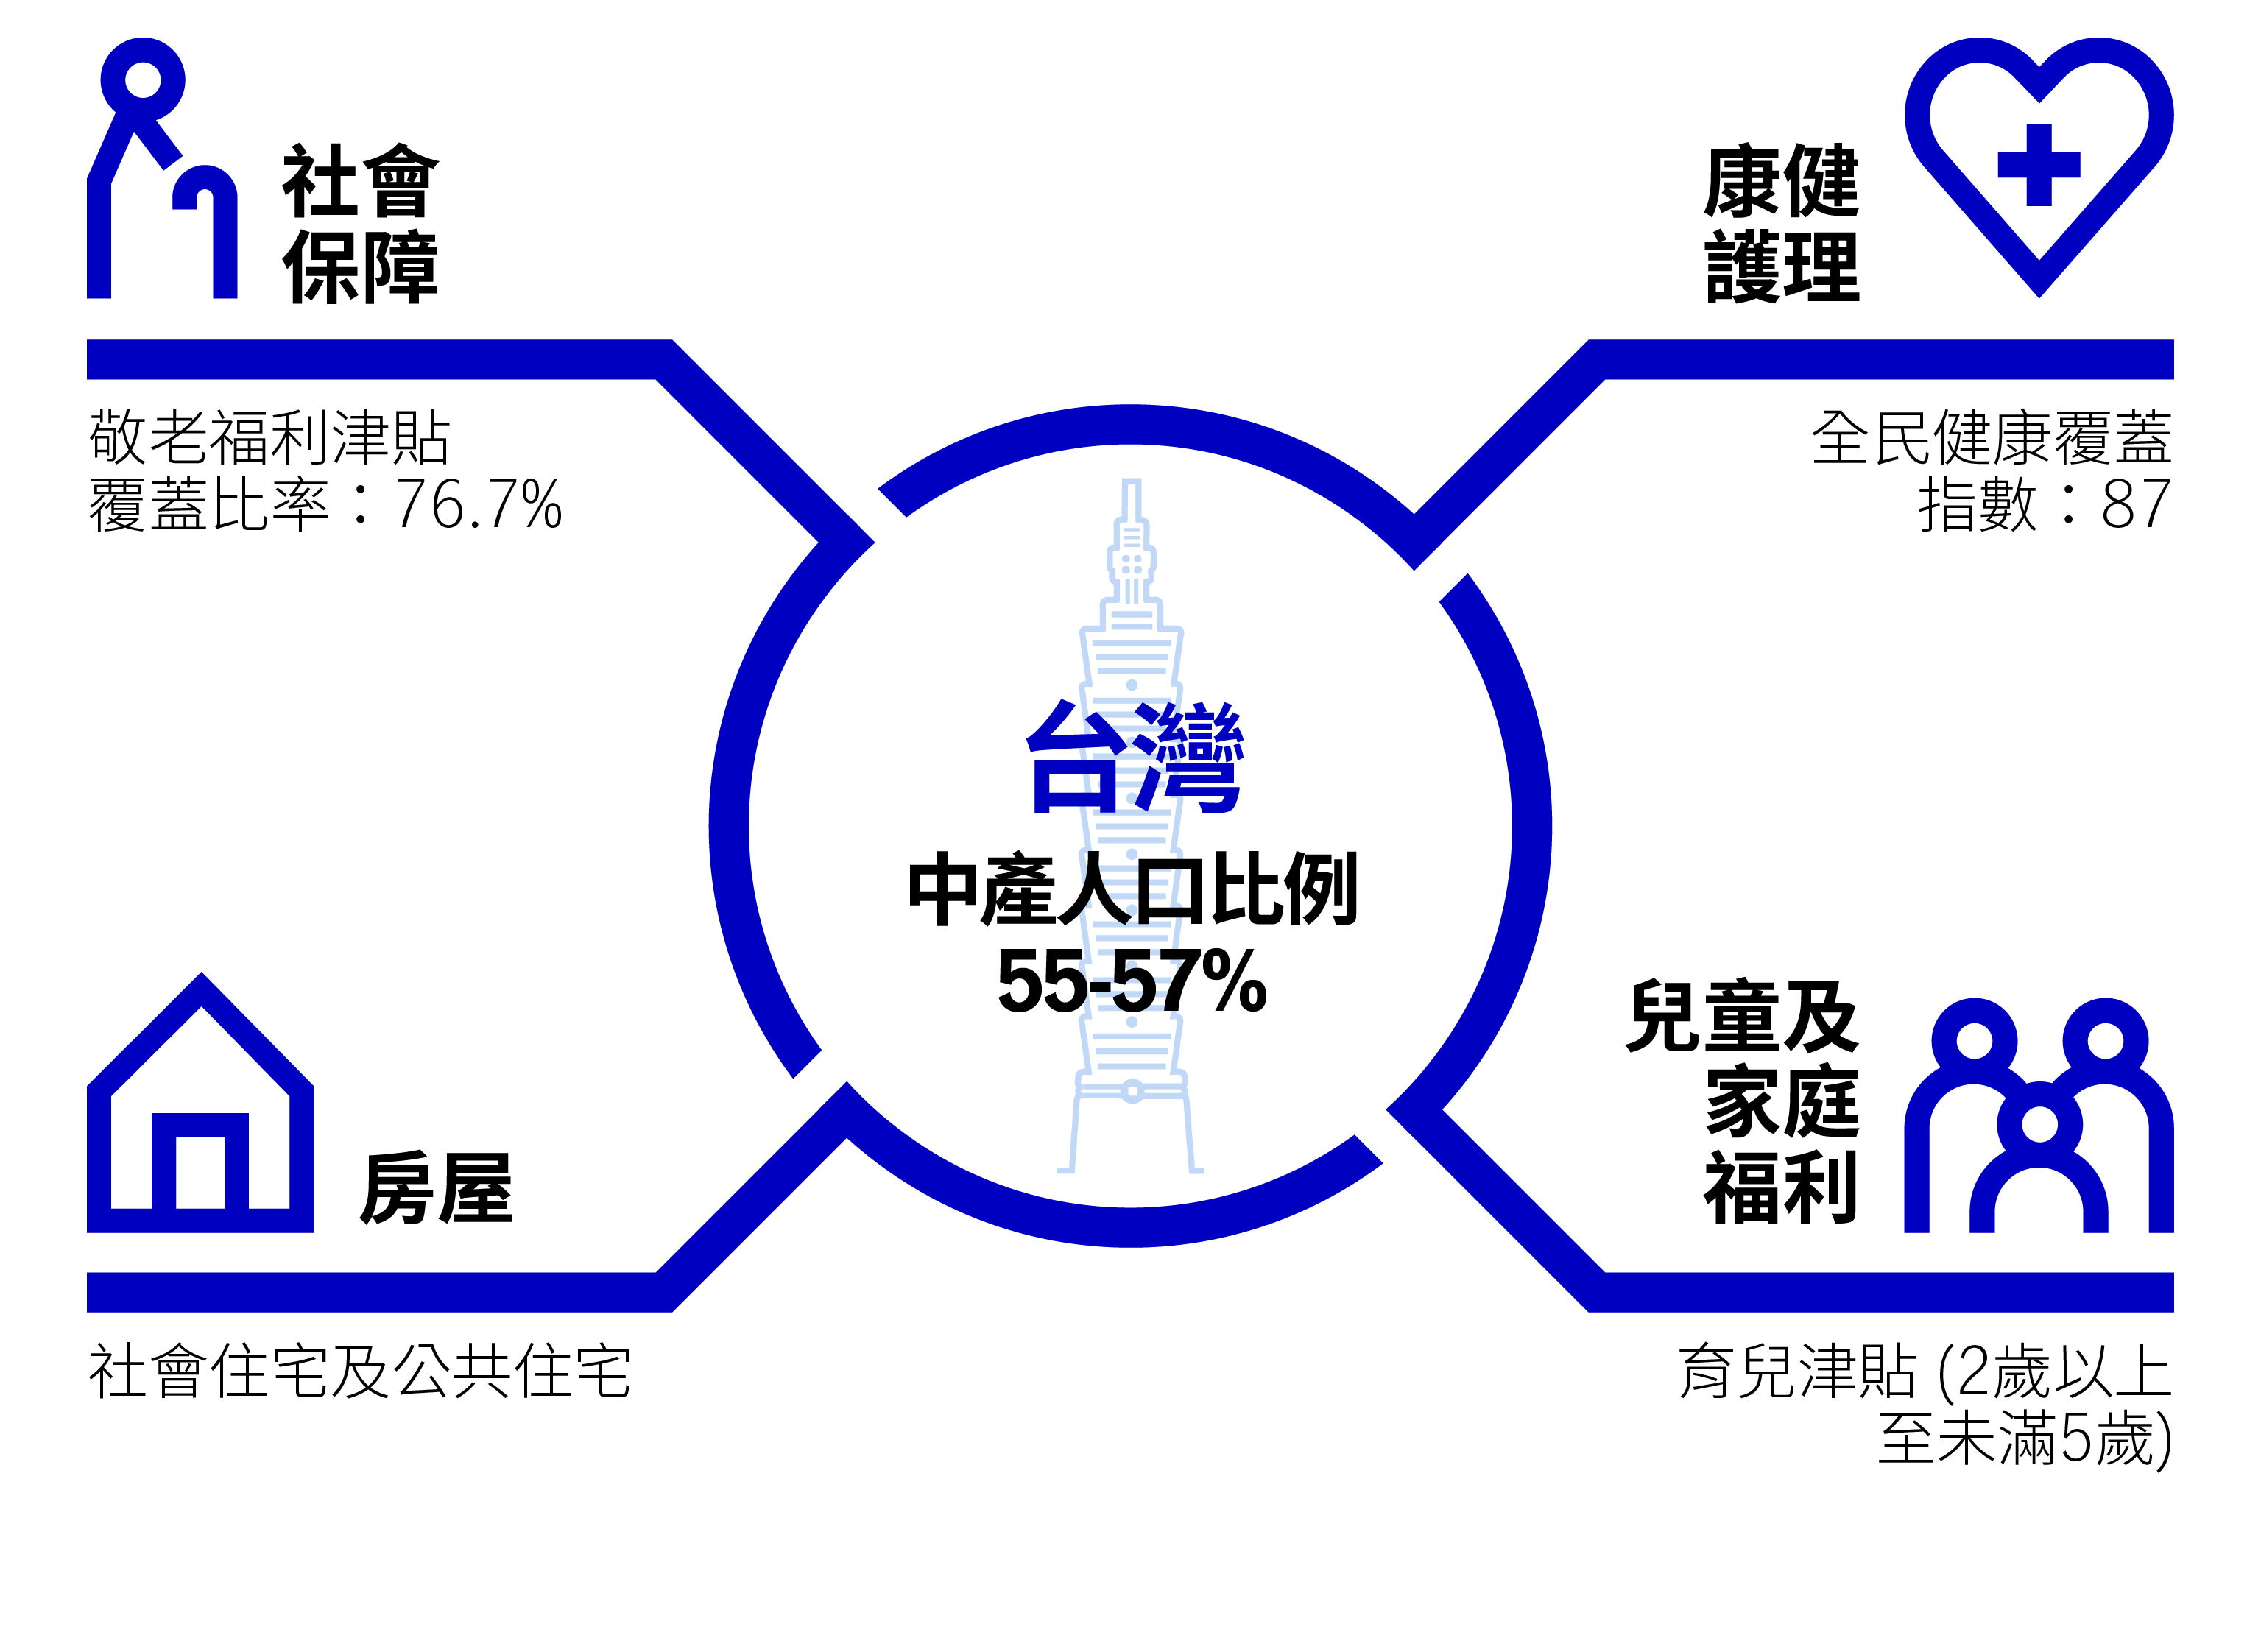 Infographic showing government support in Taiwan